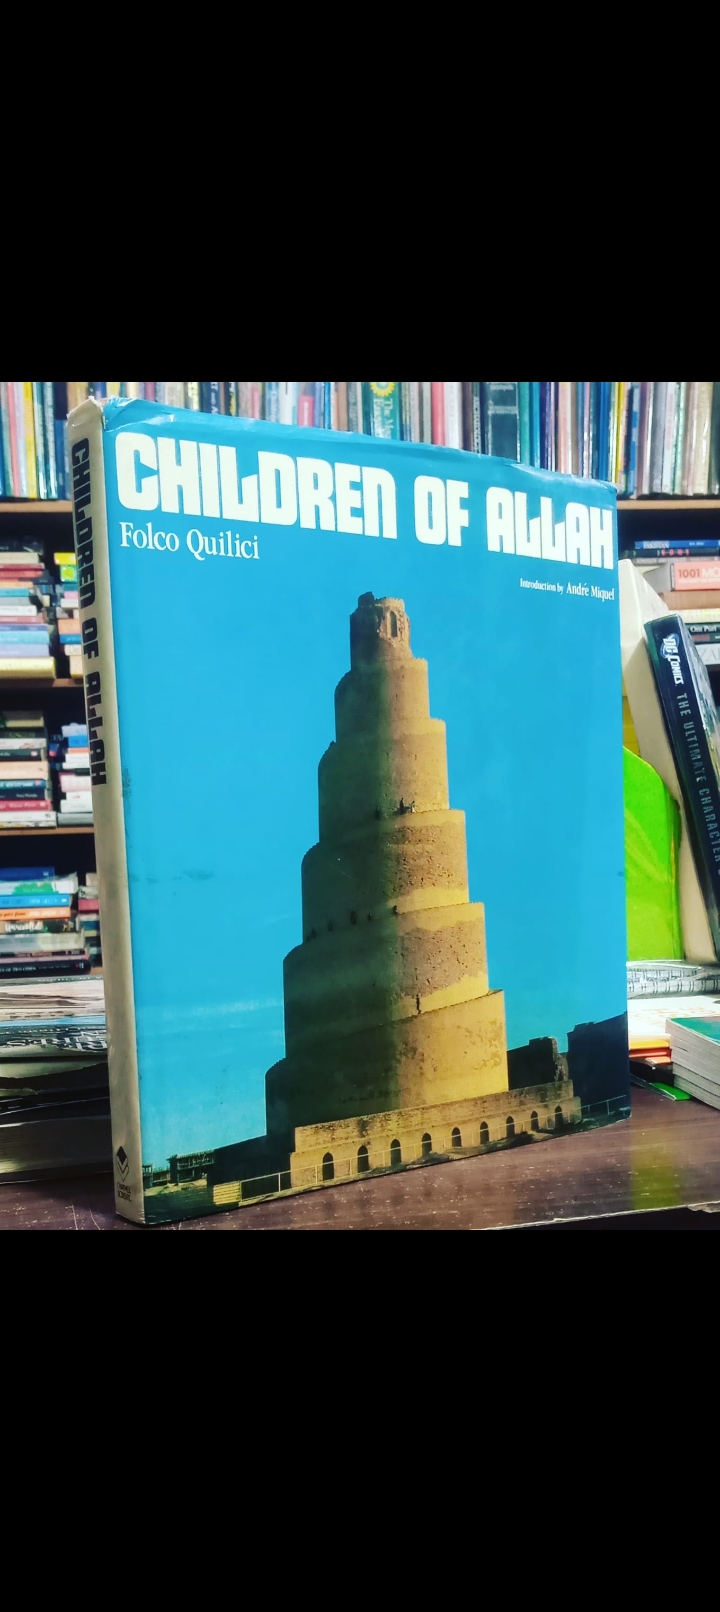 children of allah by folco quilici.120 color photographs 175 photographs in black and white 14 maps.